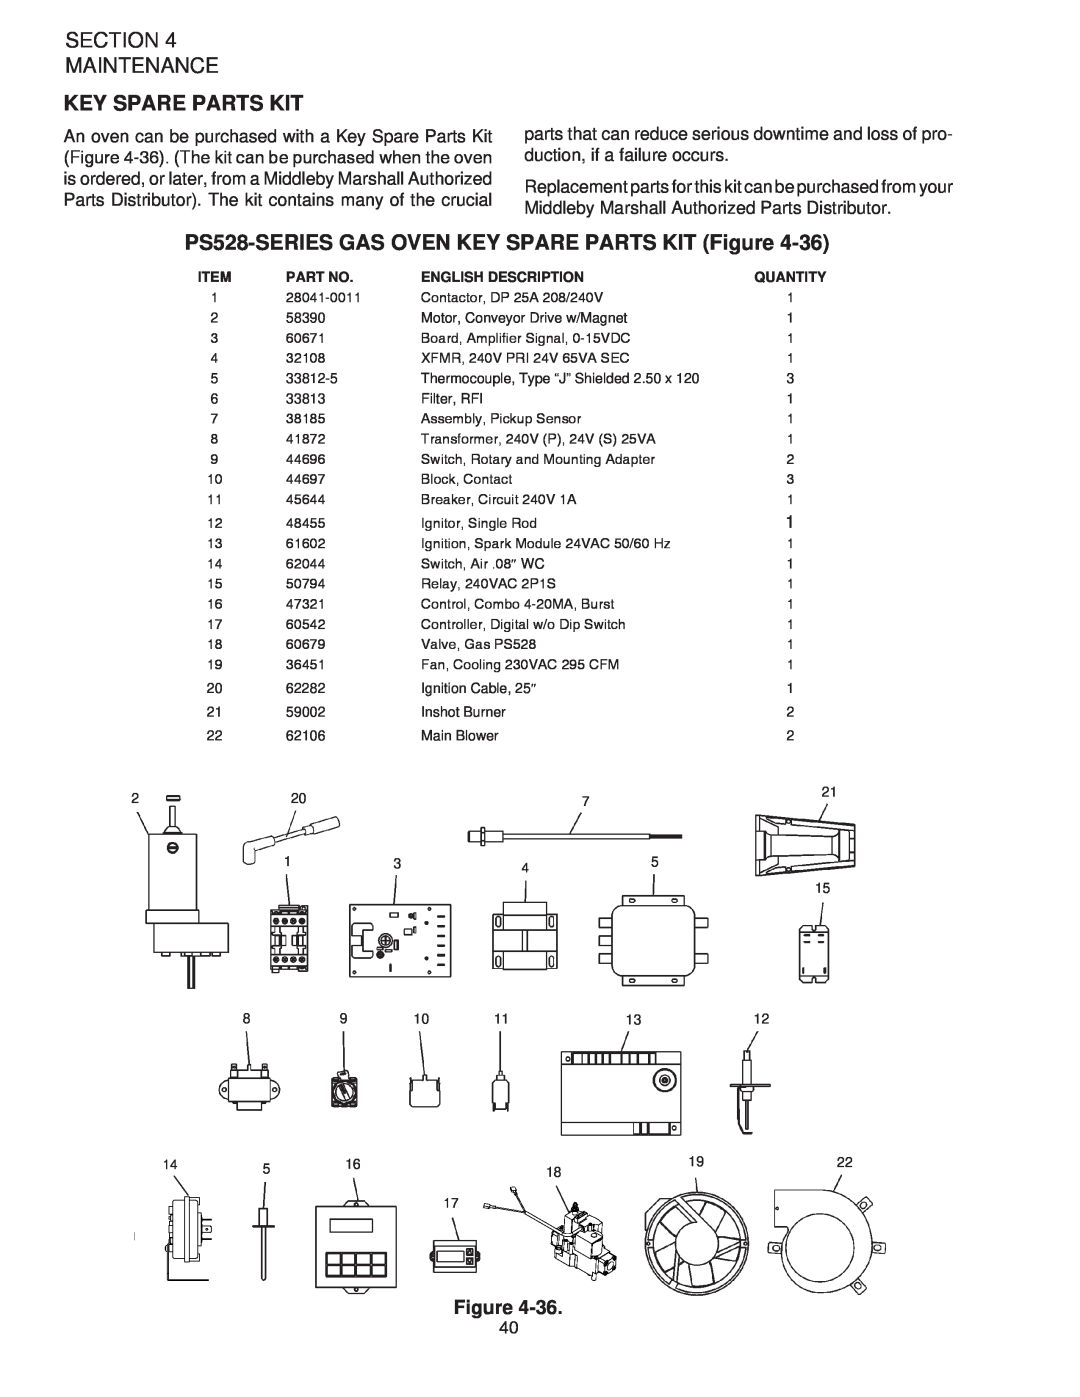 Middleby Marshall PS528G Key Spare Parts Kit, PS528-SERIES GAS OVEN KEY SPARE PARTS KIT Figure, Section Maintenance 